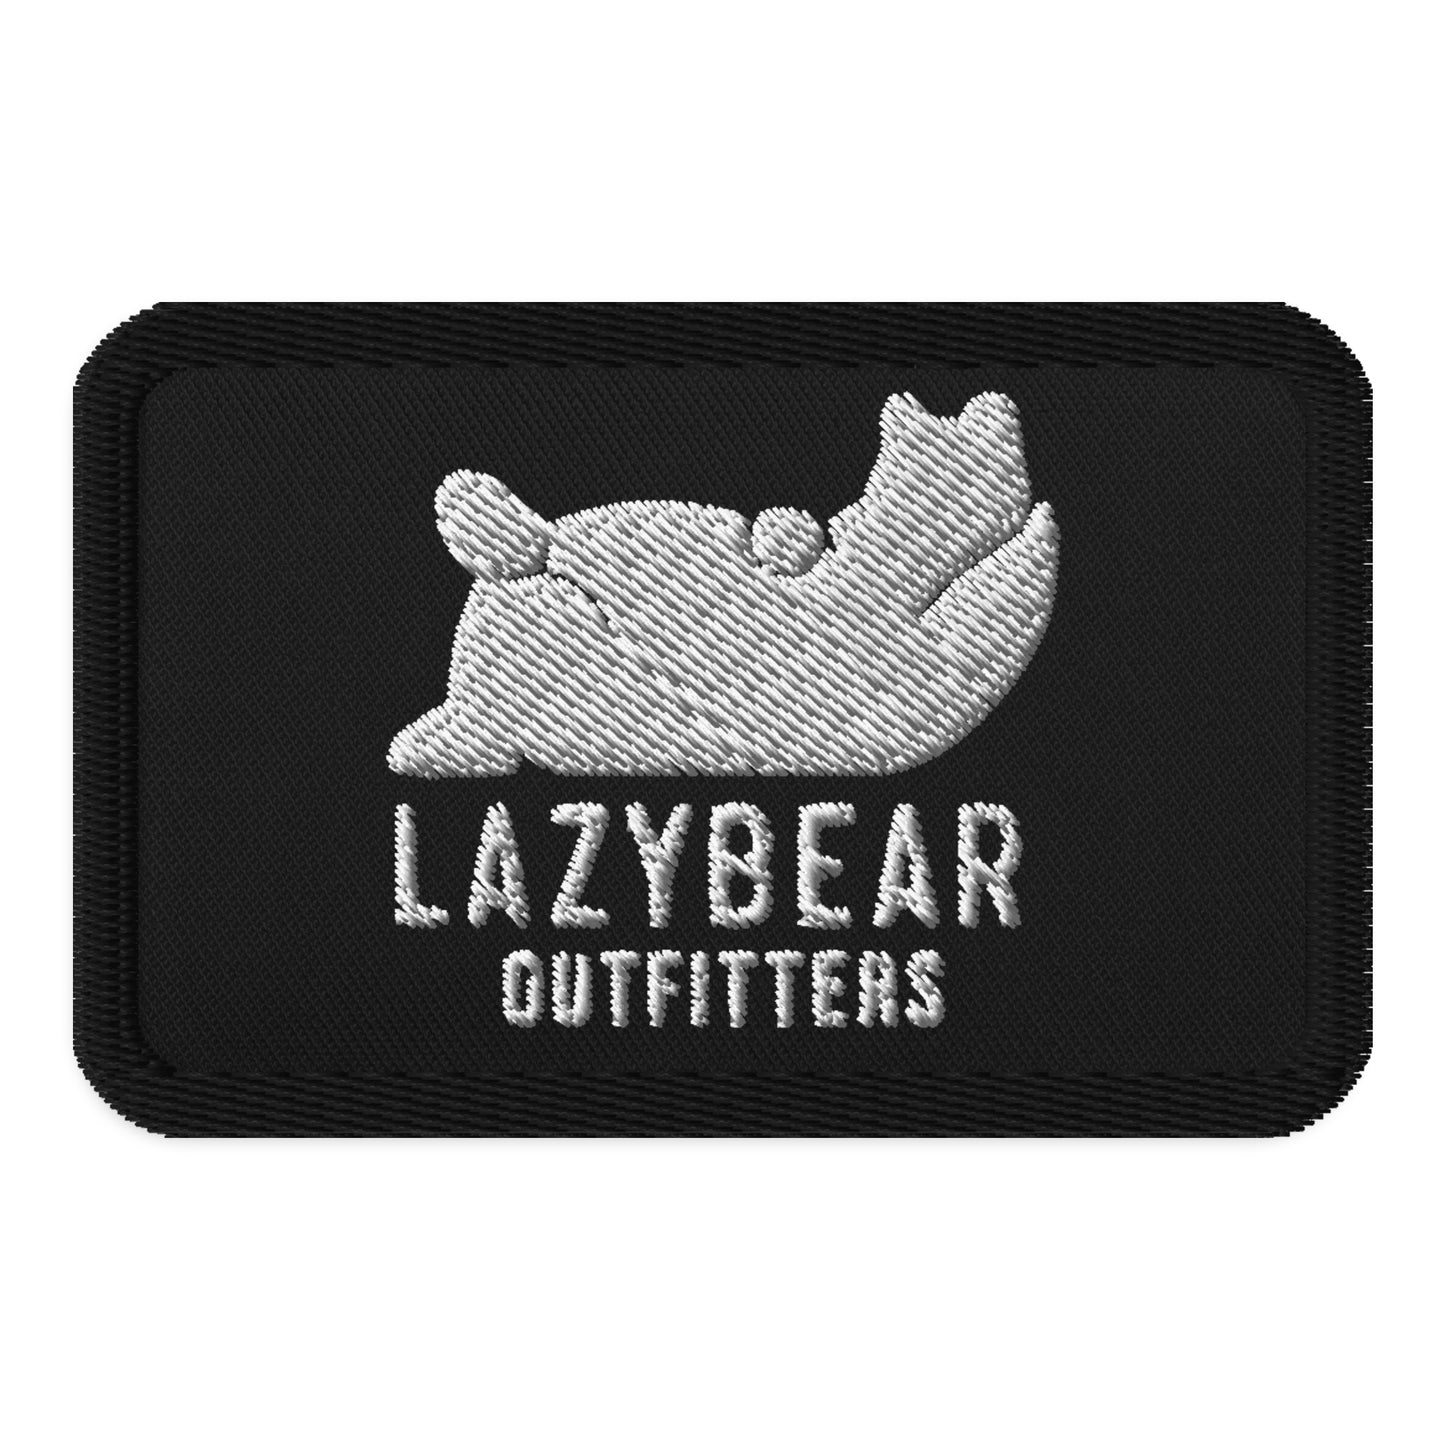 Lazy Bear Outfitters Embroidered Patch (White logo on black)